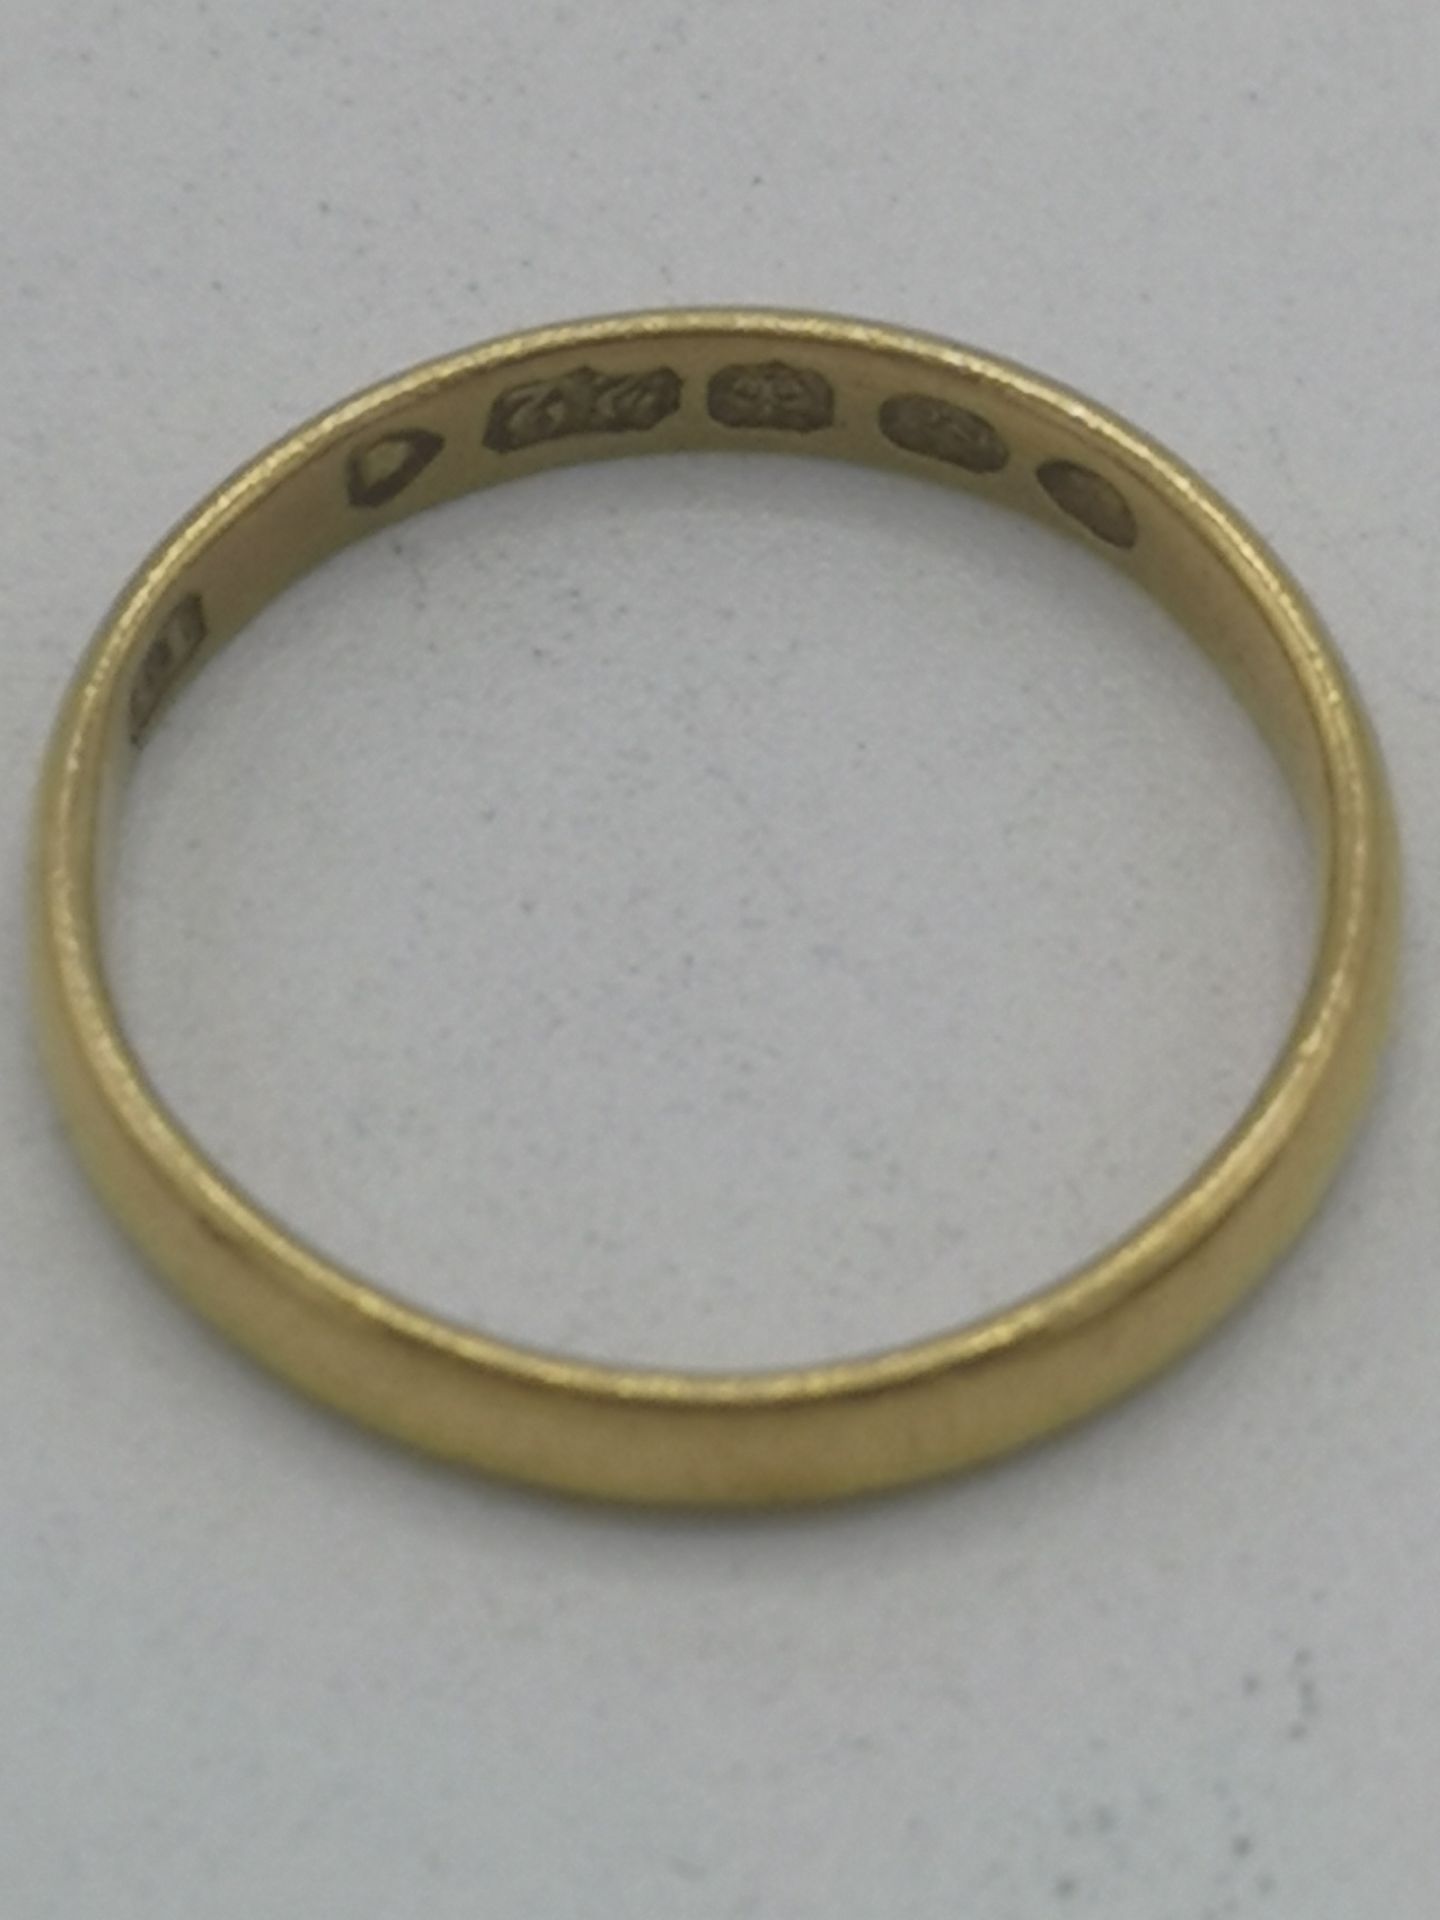 22ct gold band - Image 3 of 3